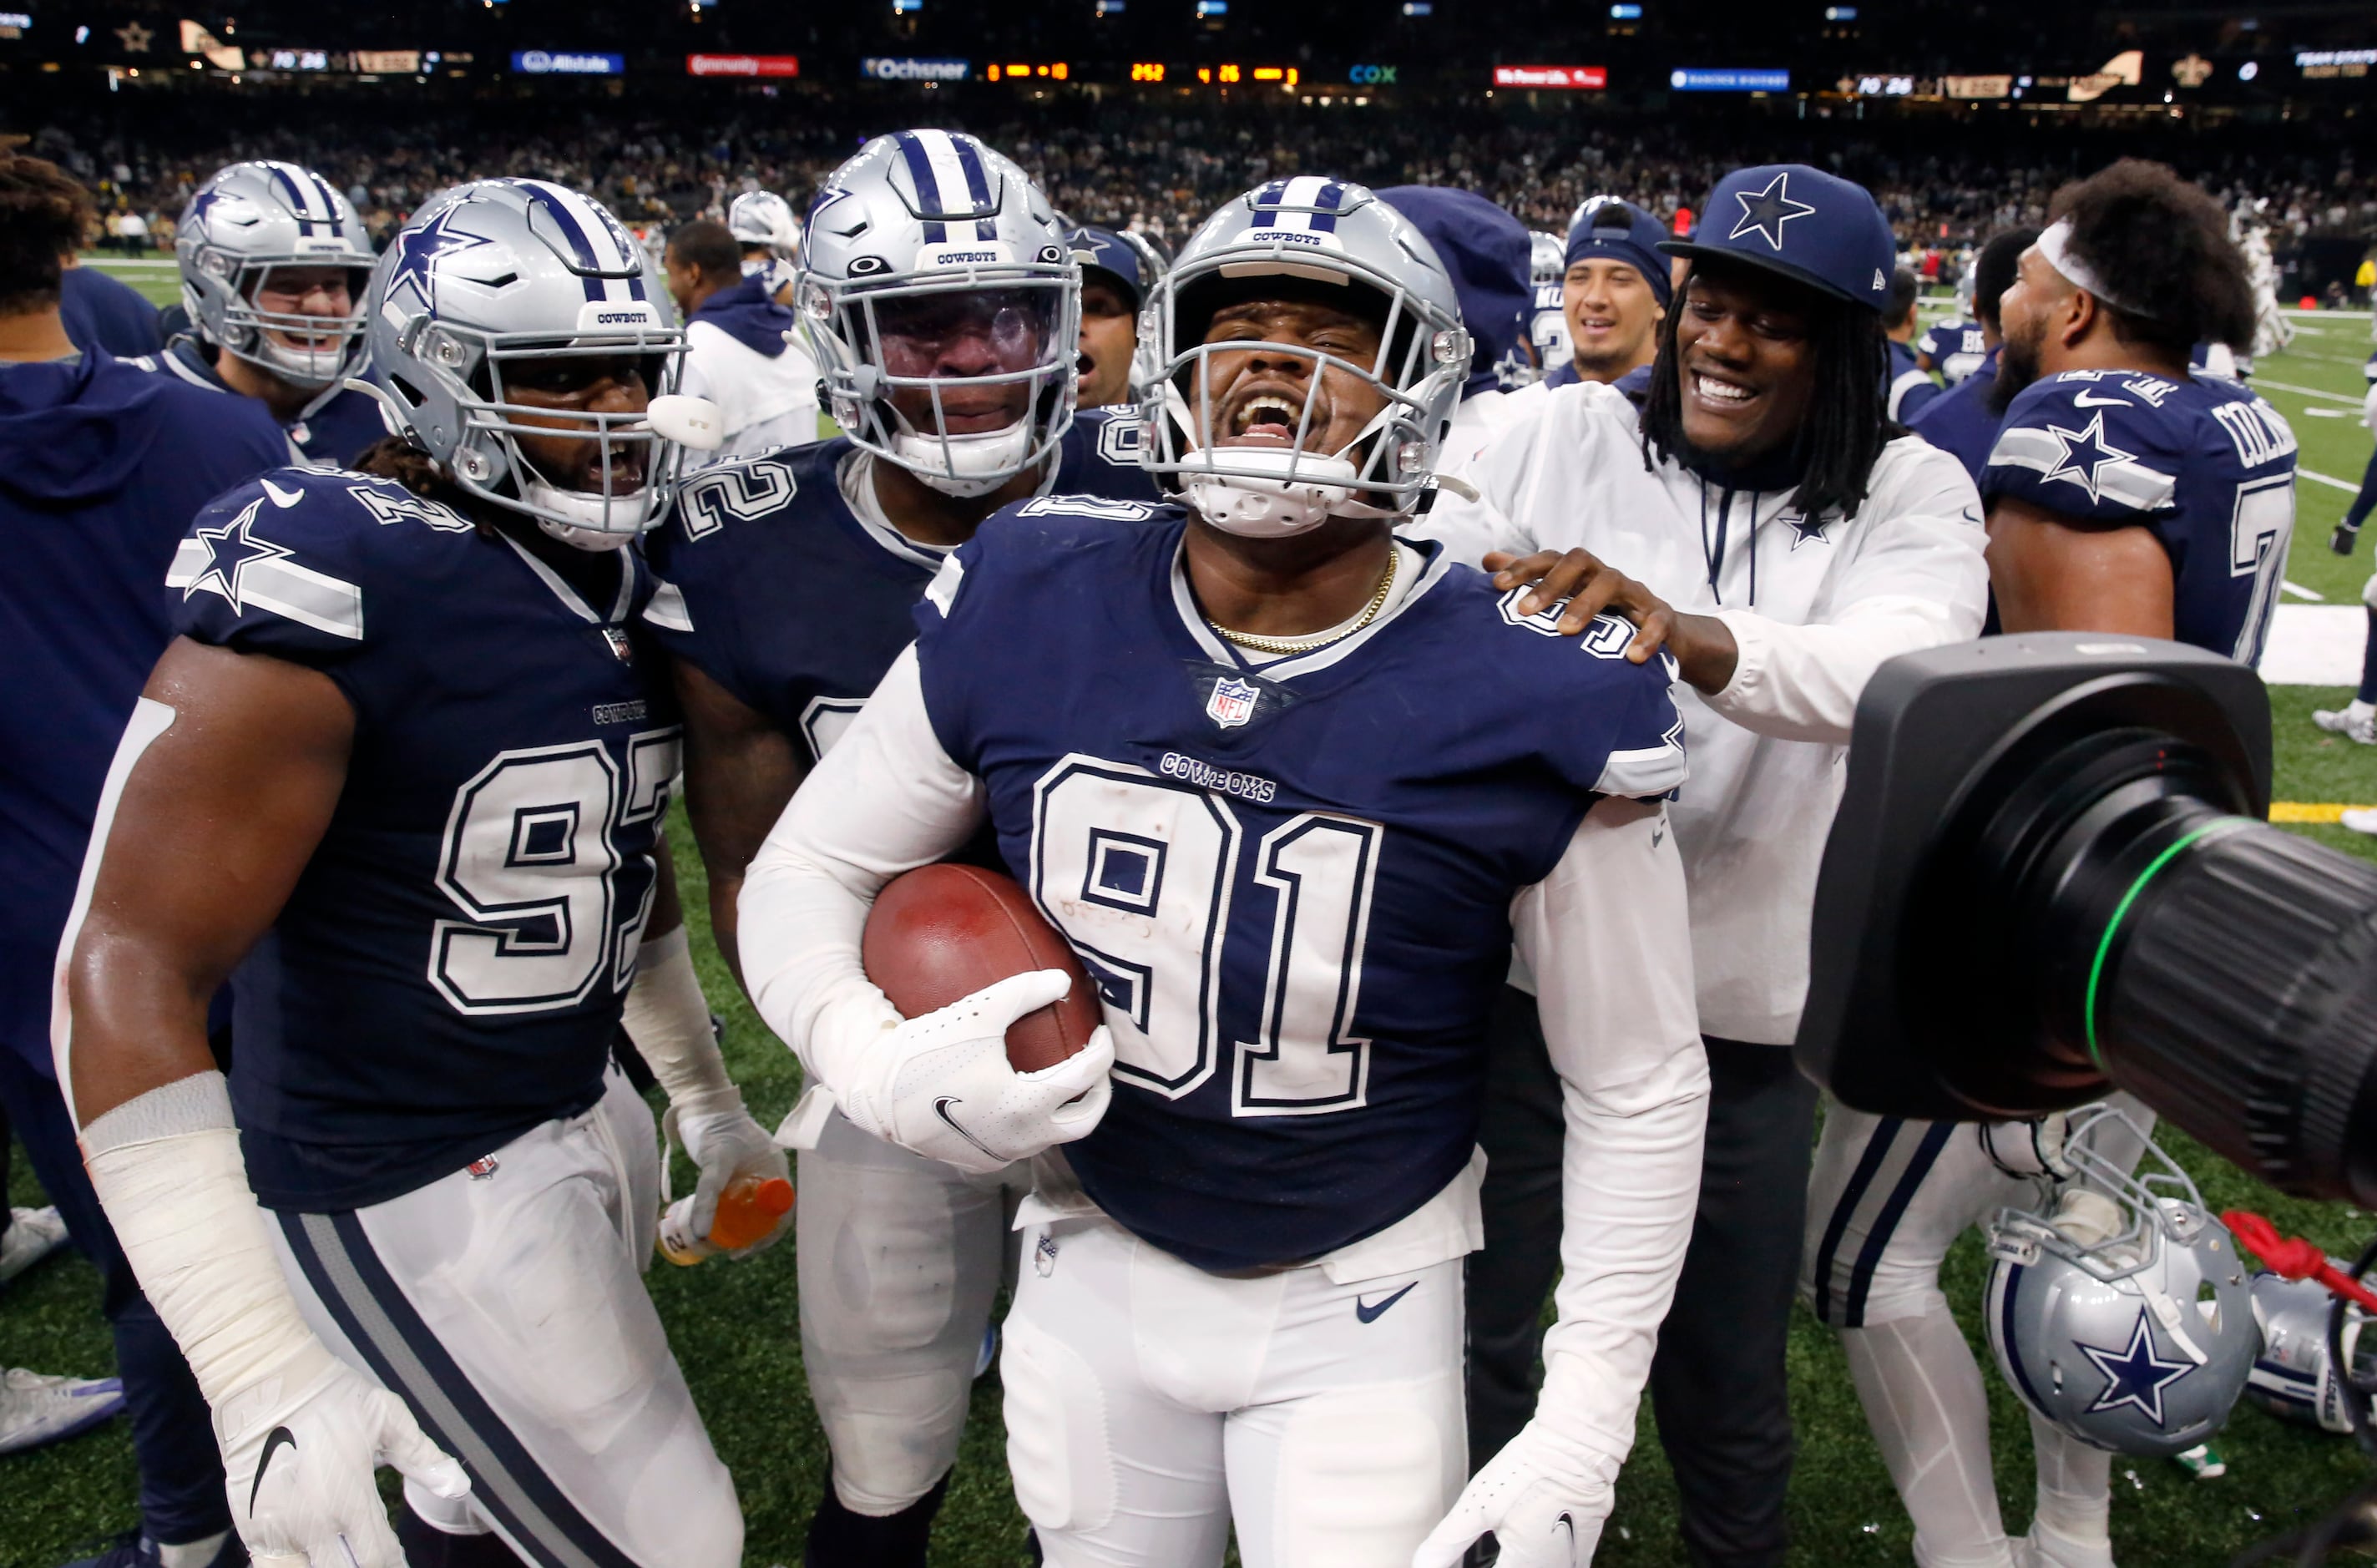 Big-boy score! Check out our best photos from the Cowboys' win in New  Orleans